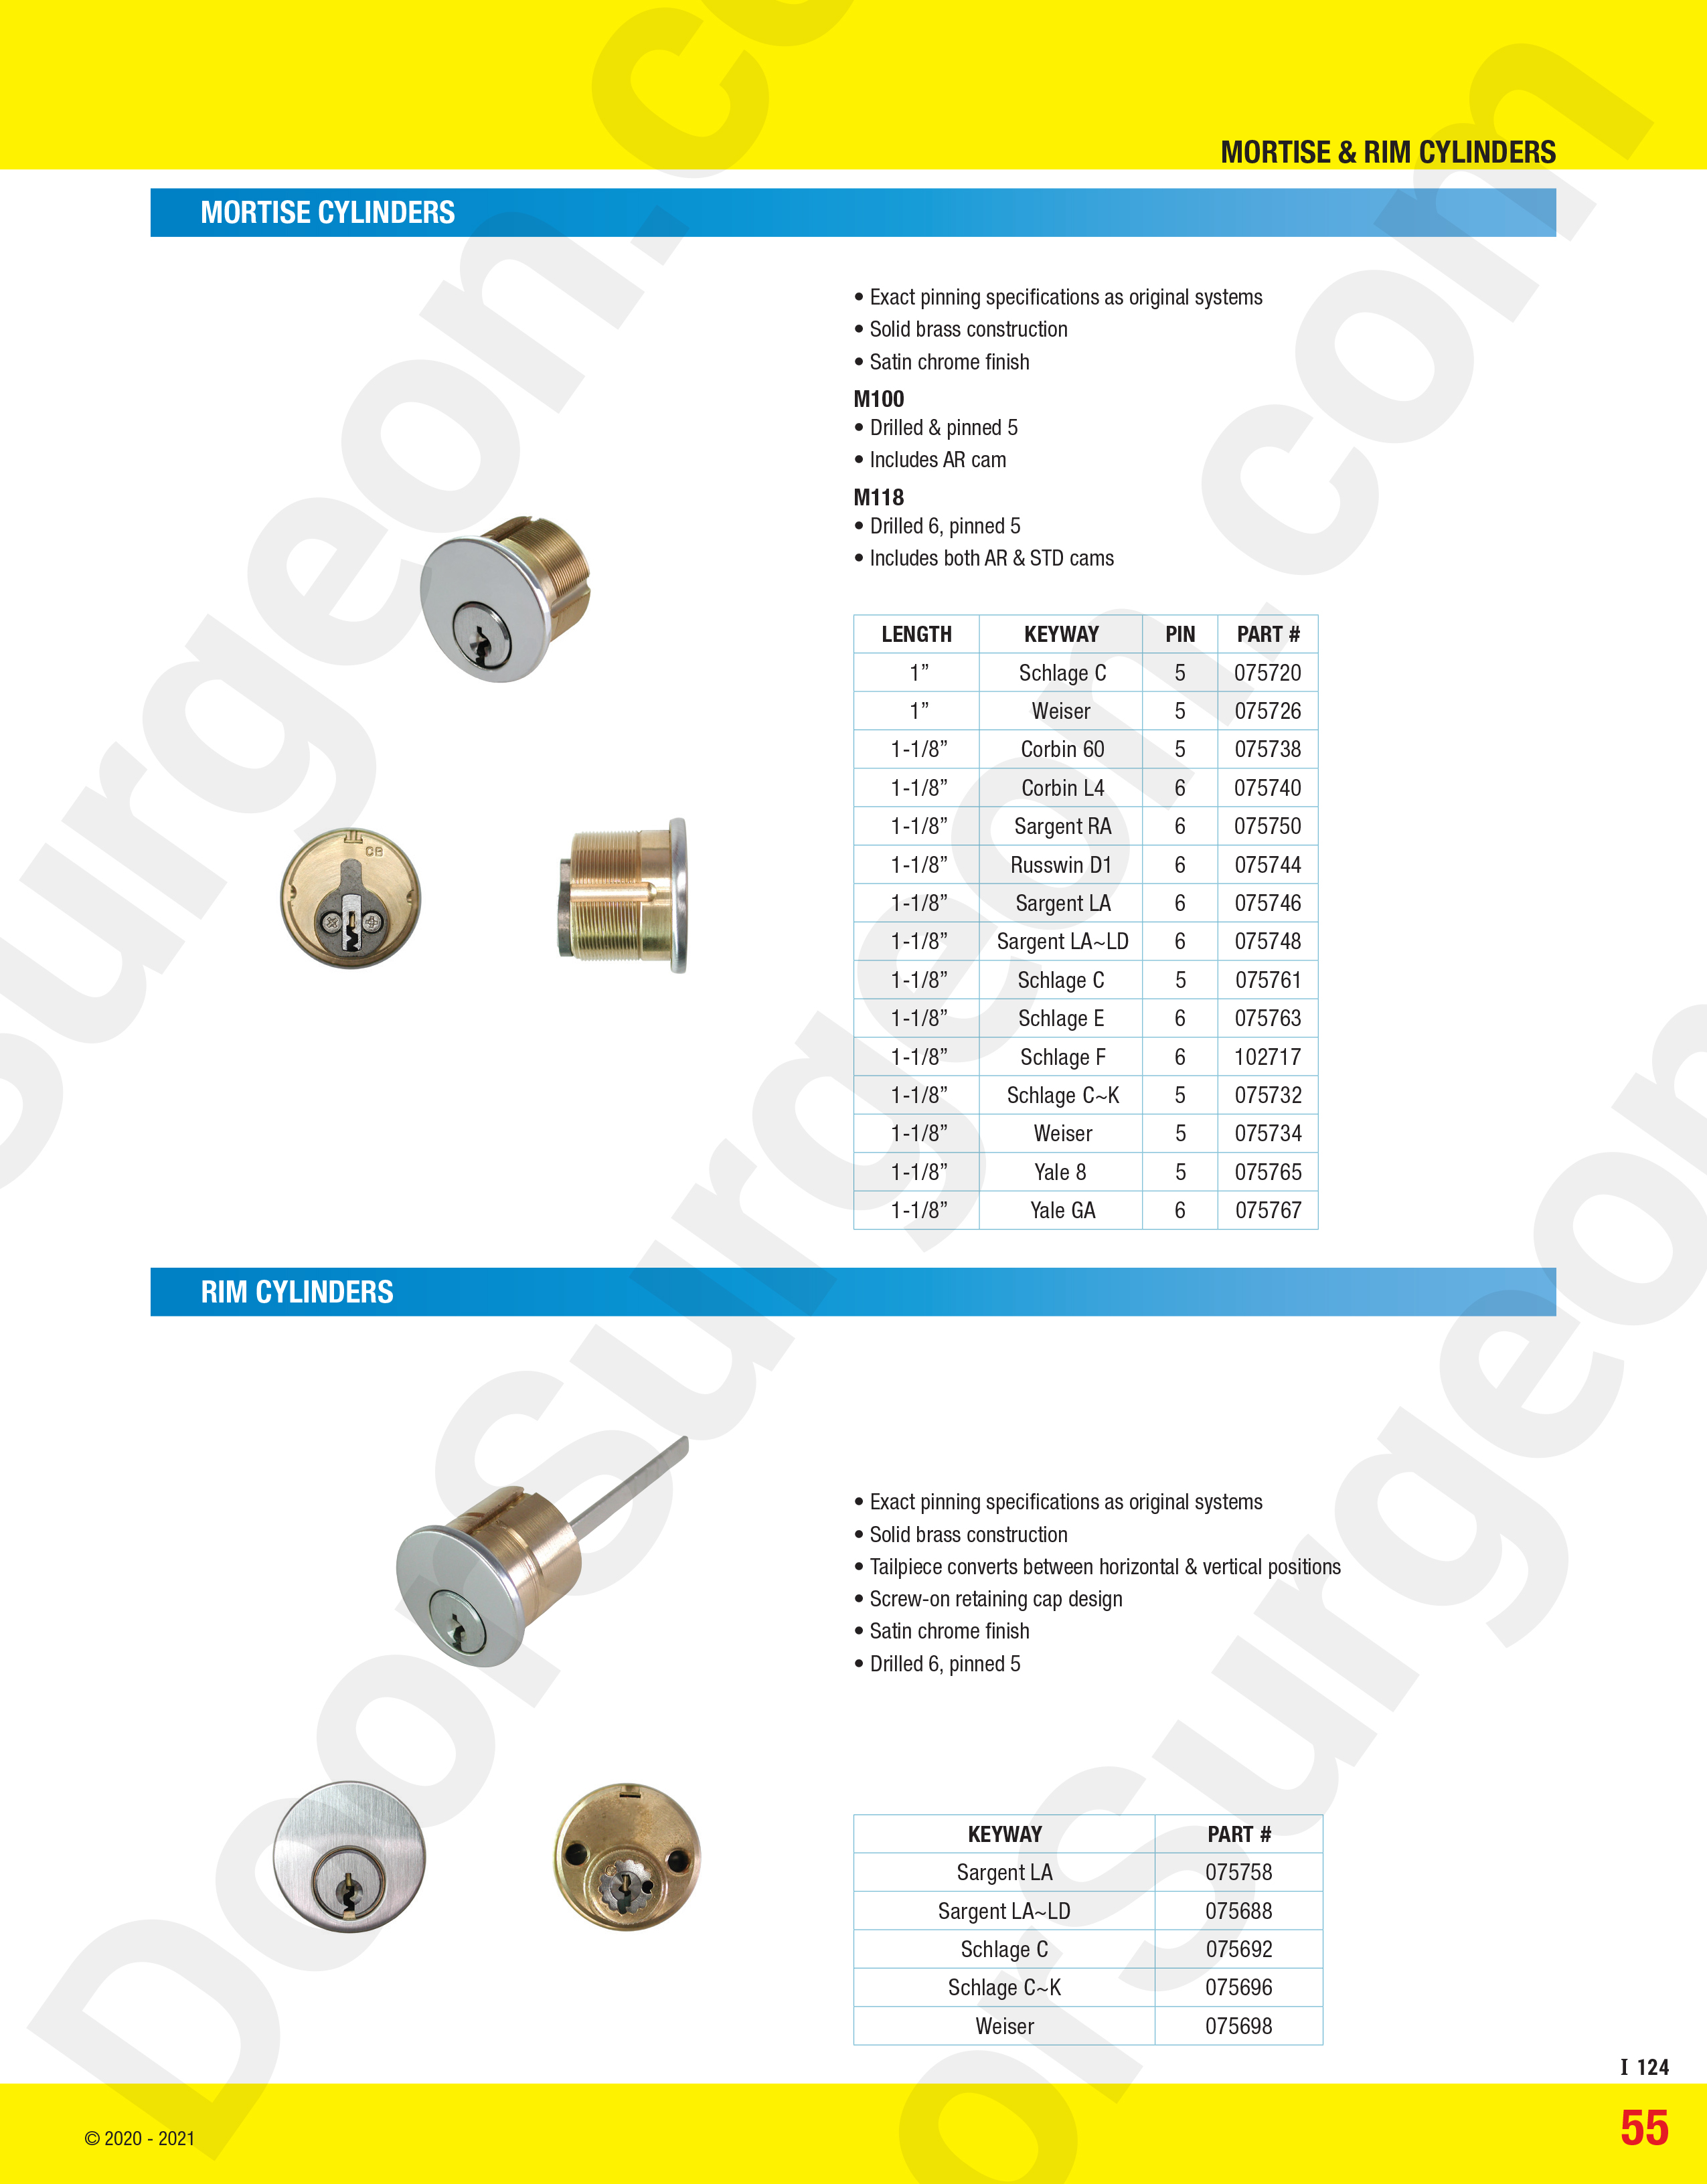 Mortise cylinder cams and key blanks.